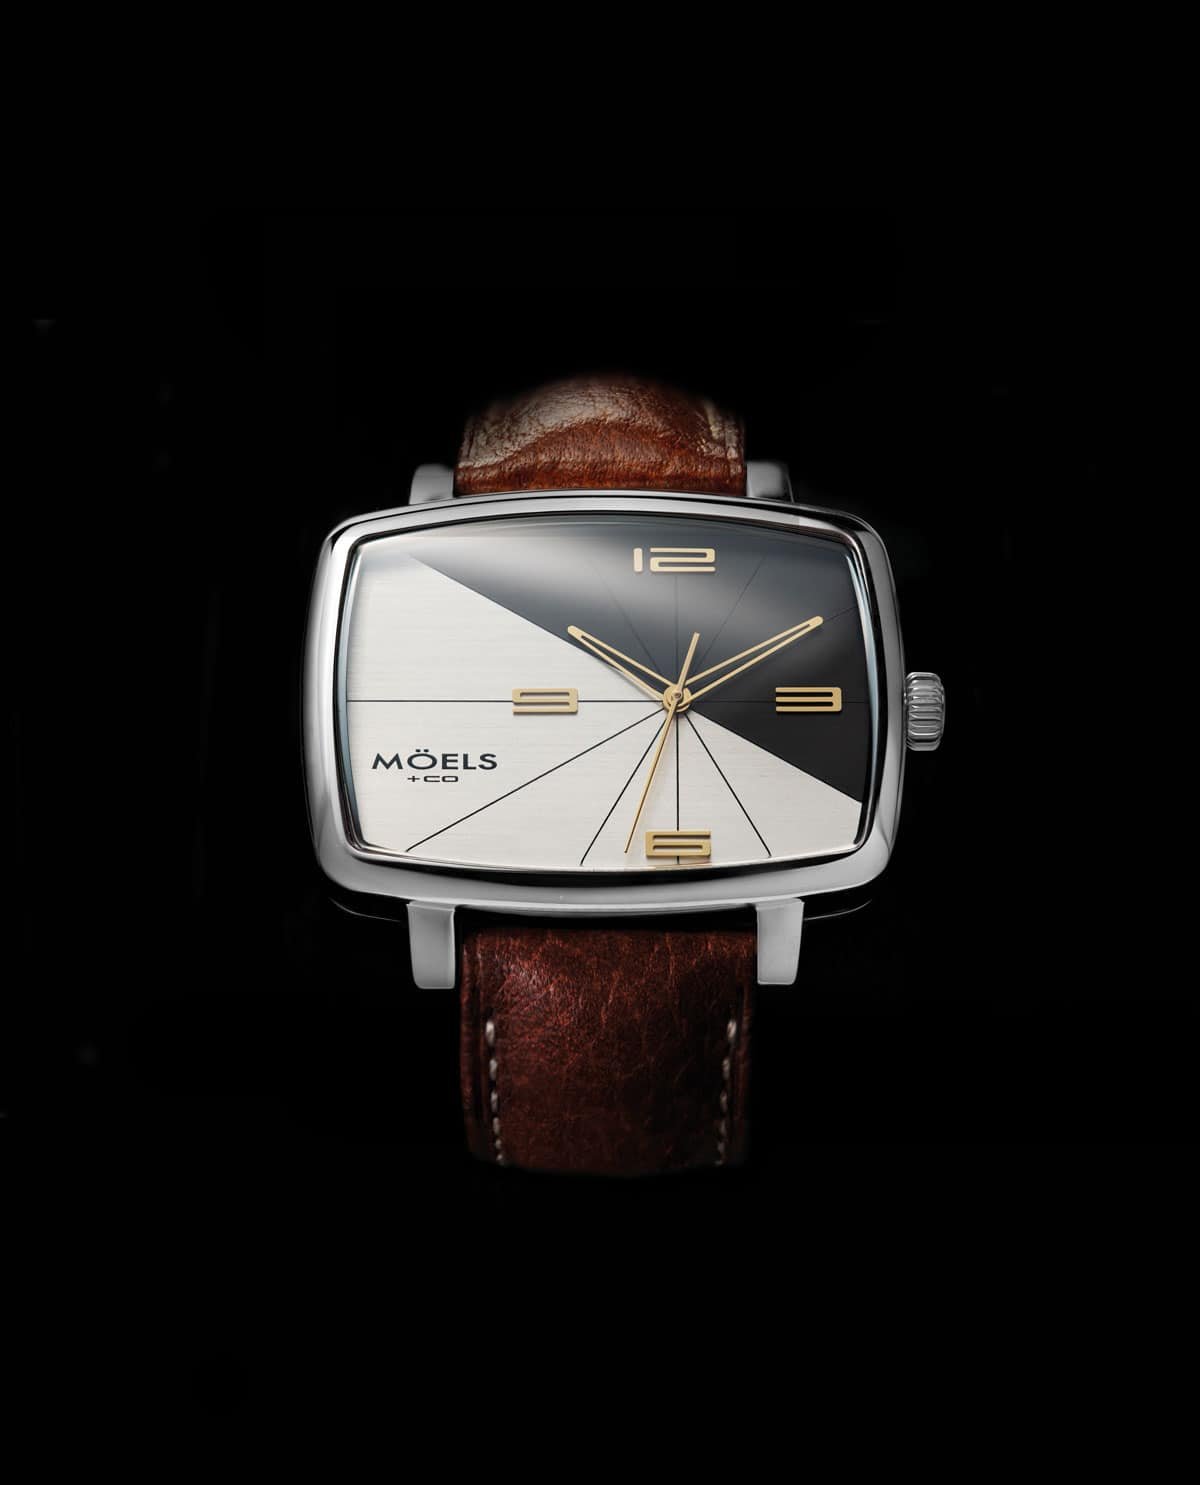 A precision made watch with a brown leather strap on a black background.